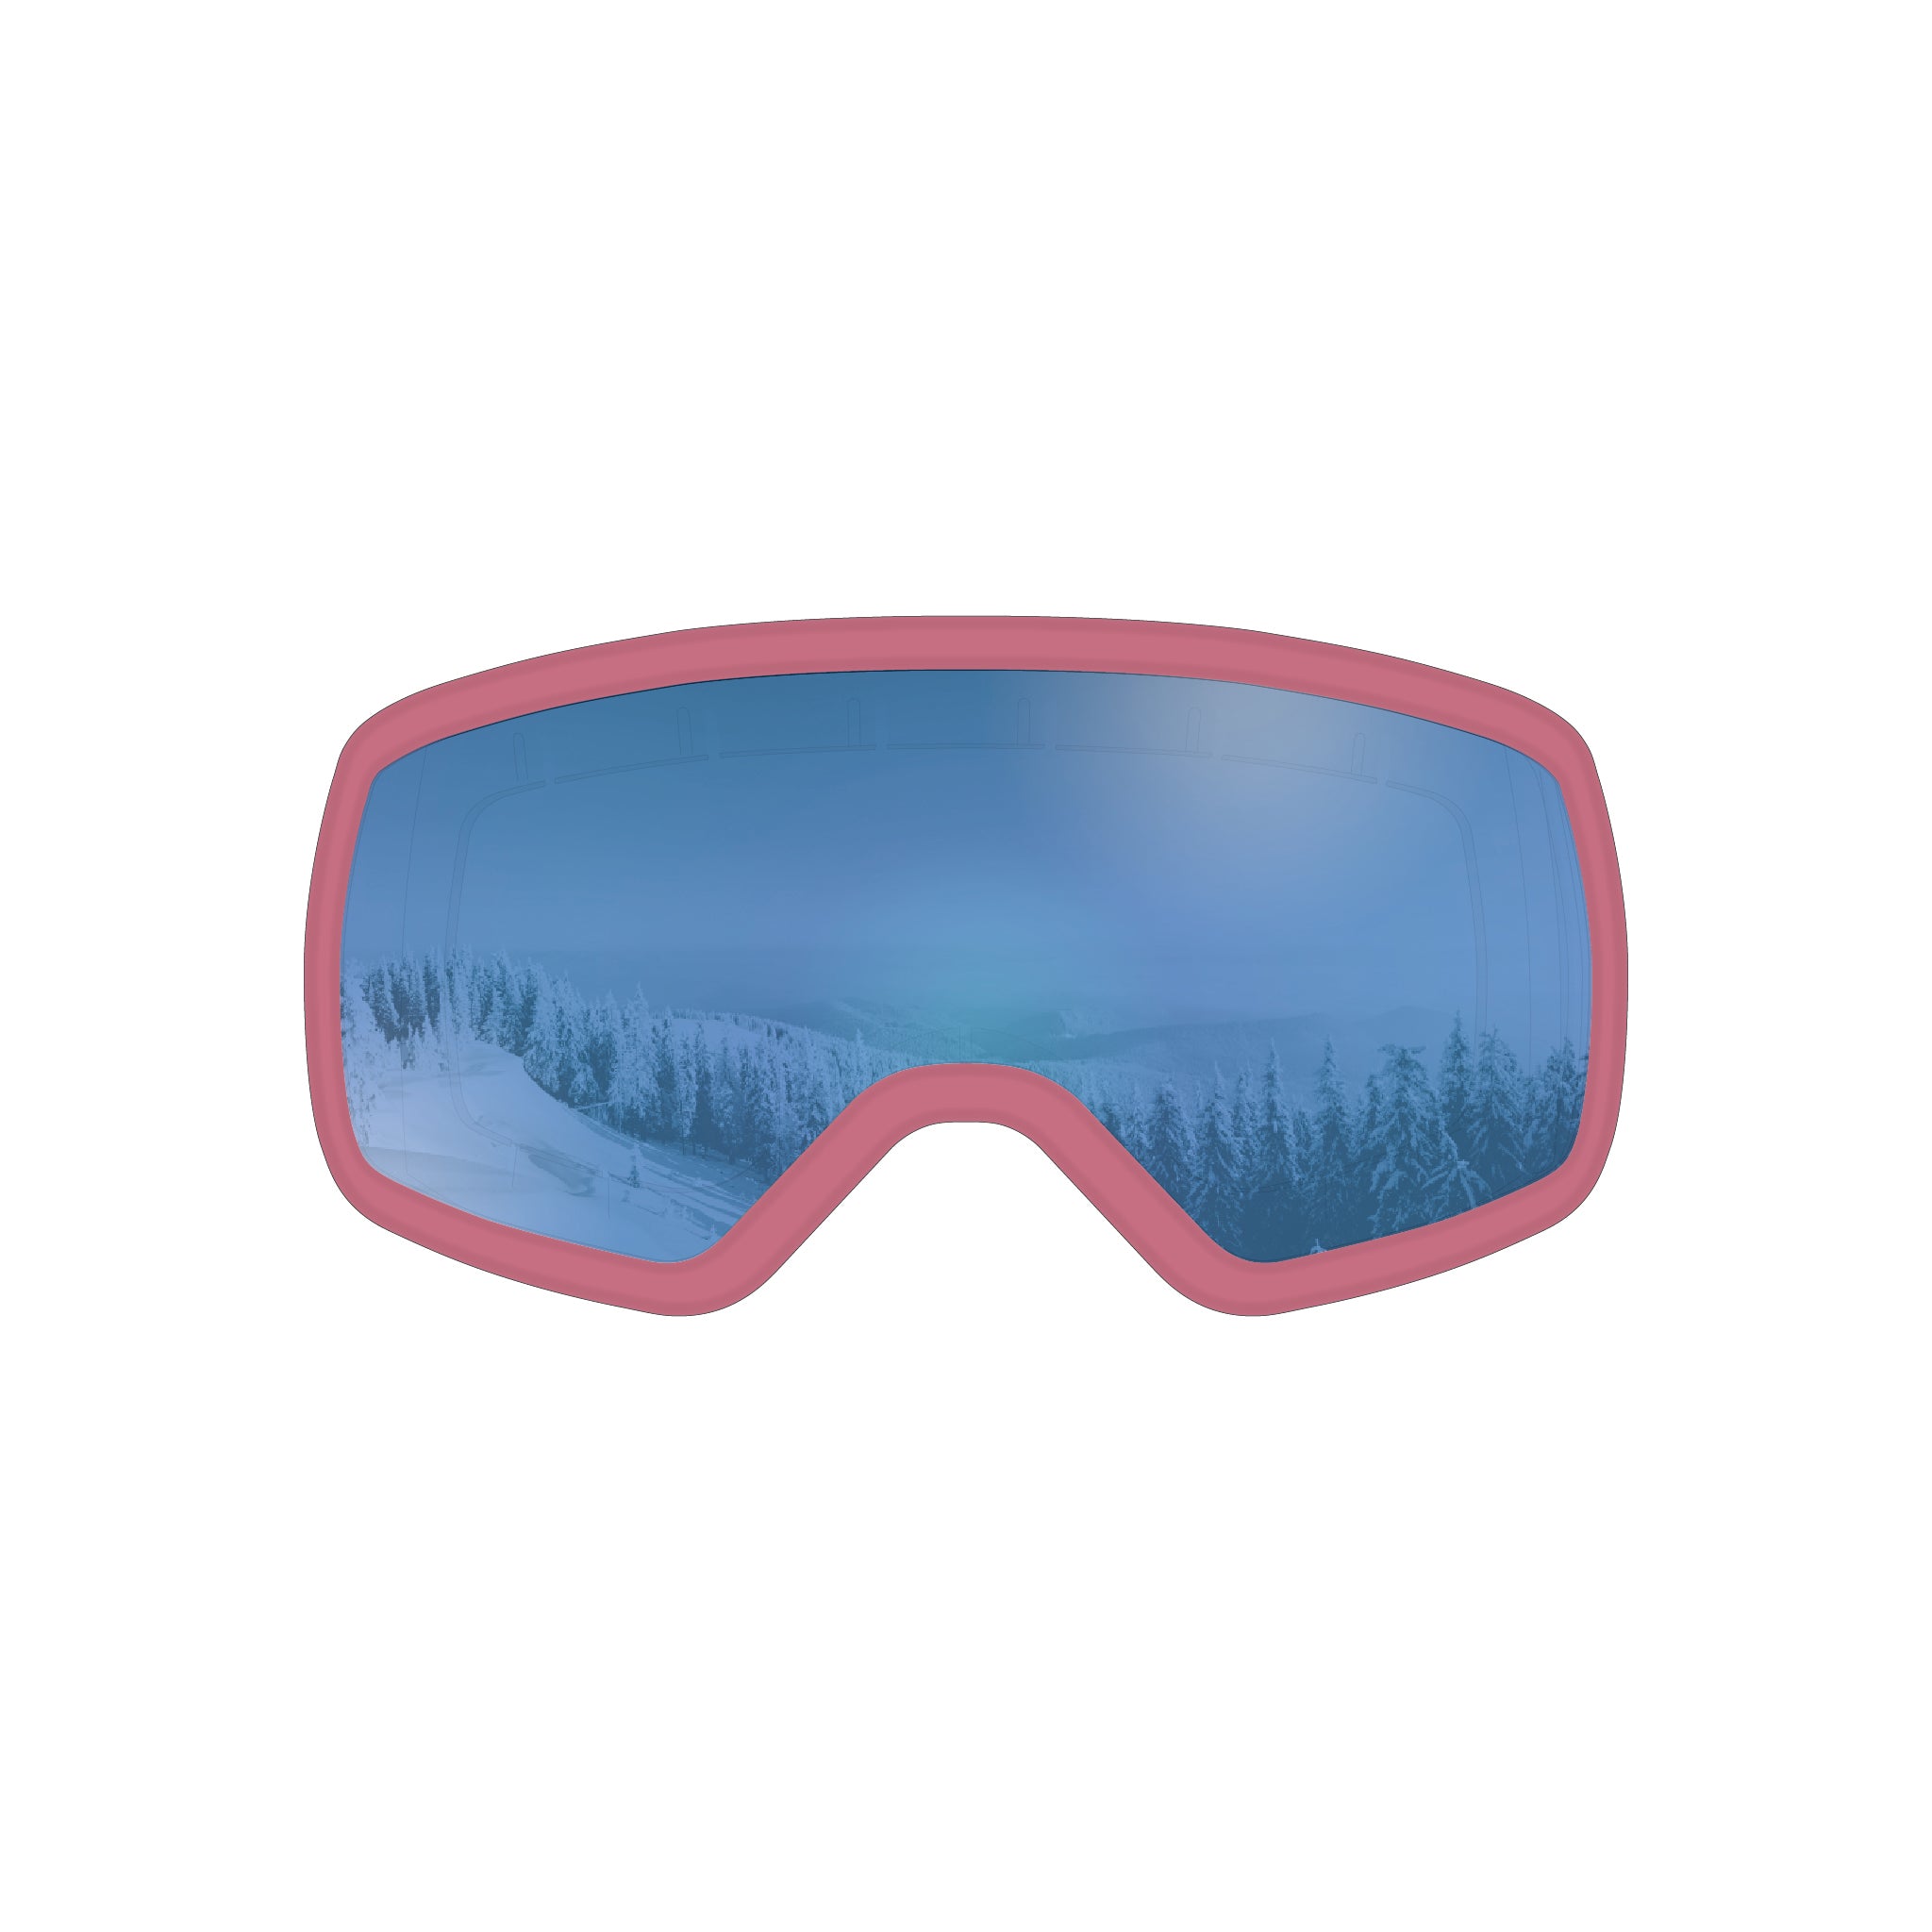 STAGE 8Track Ski Goggle w/ Blue Revo Lens and Pink Frame - Fits teens, ages 9 -13. Youth ski goggle.